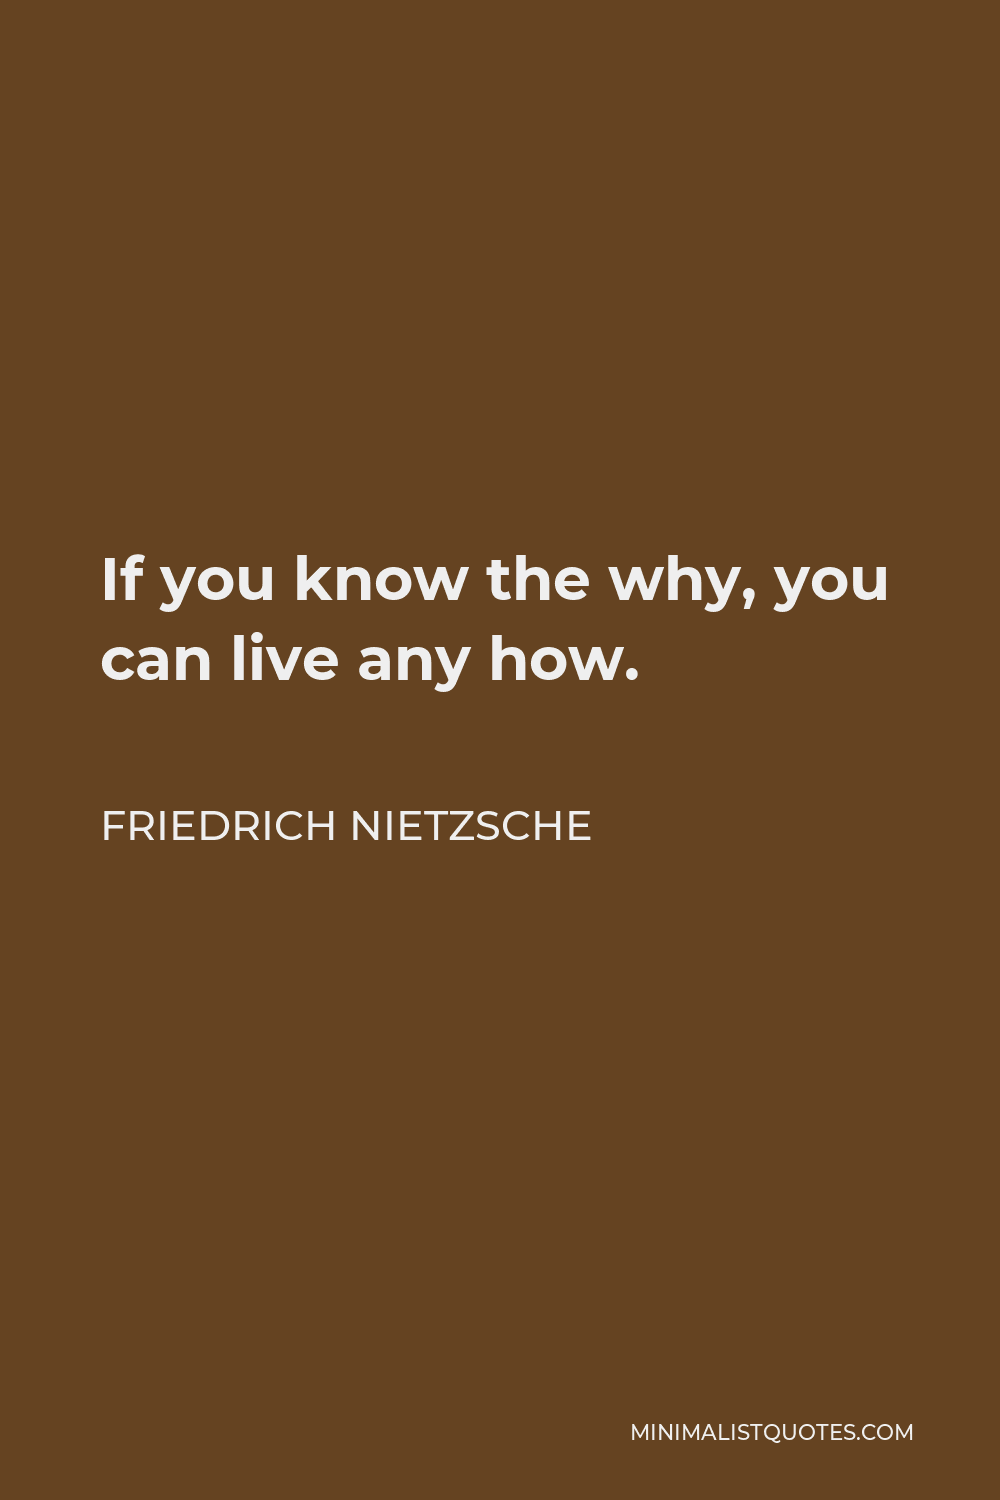 Friedrich Nietzsche Quote - If you know the why, you can live any how.